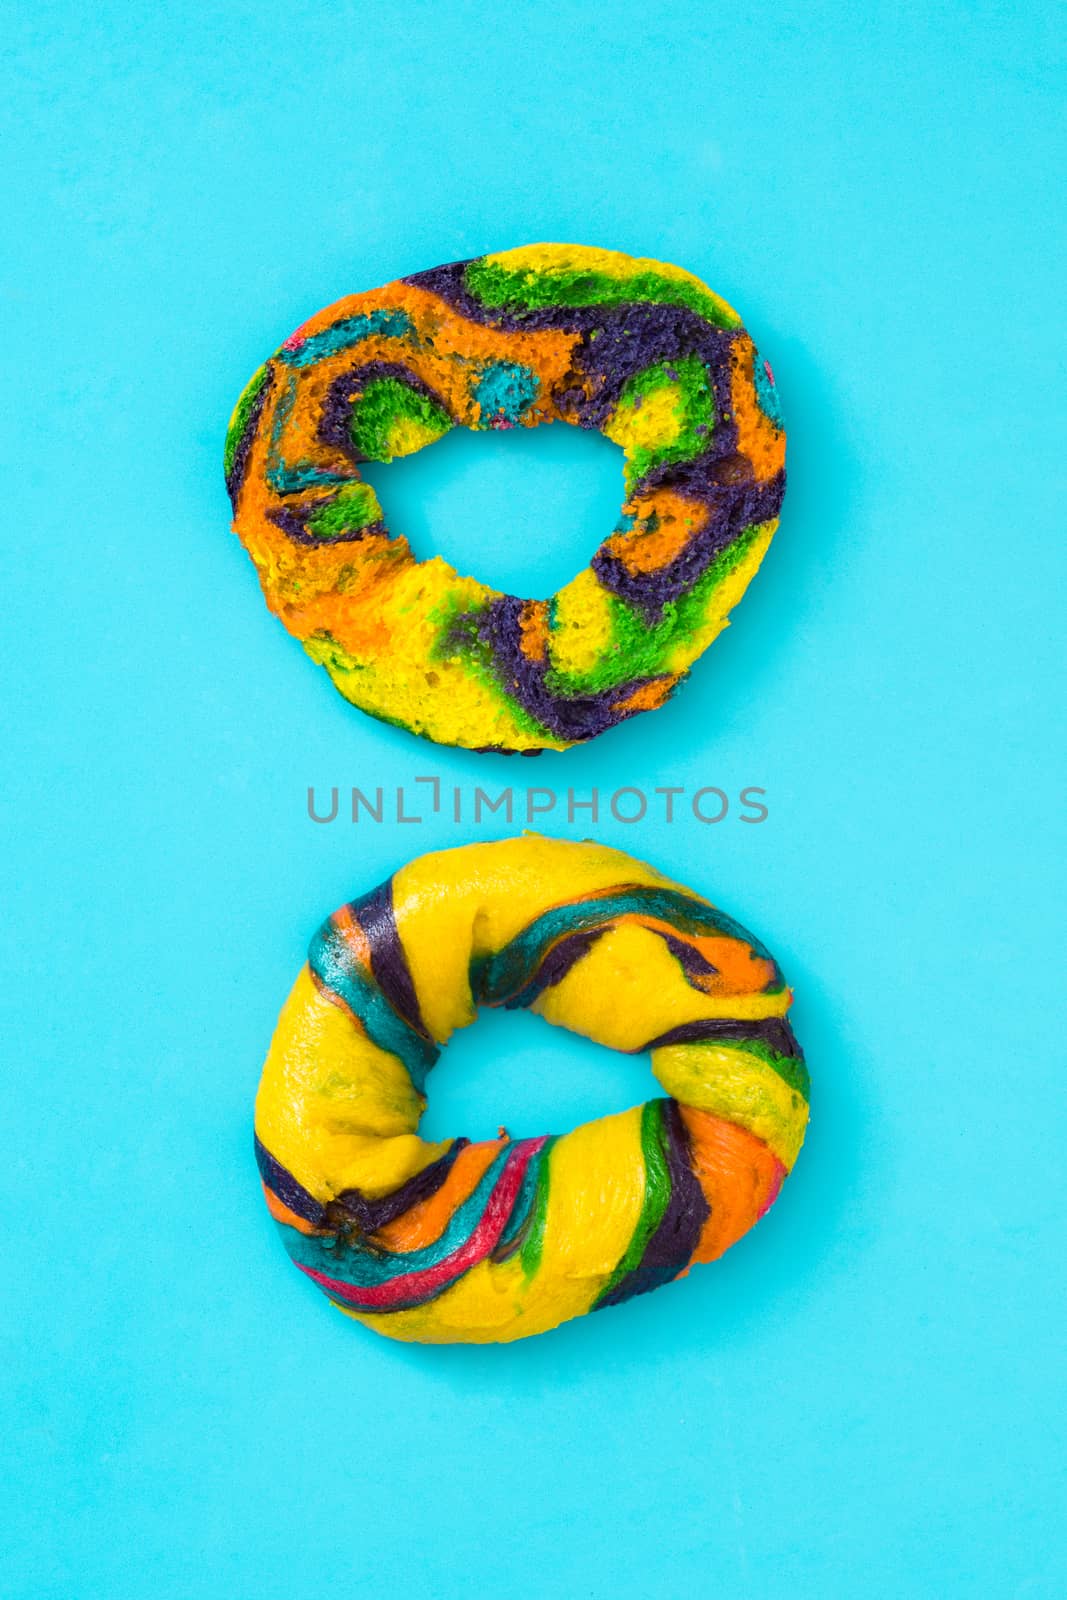 Colorful bagel on blue background by chandlervid85